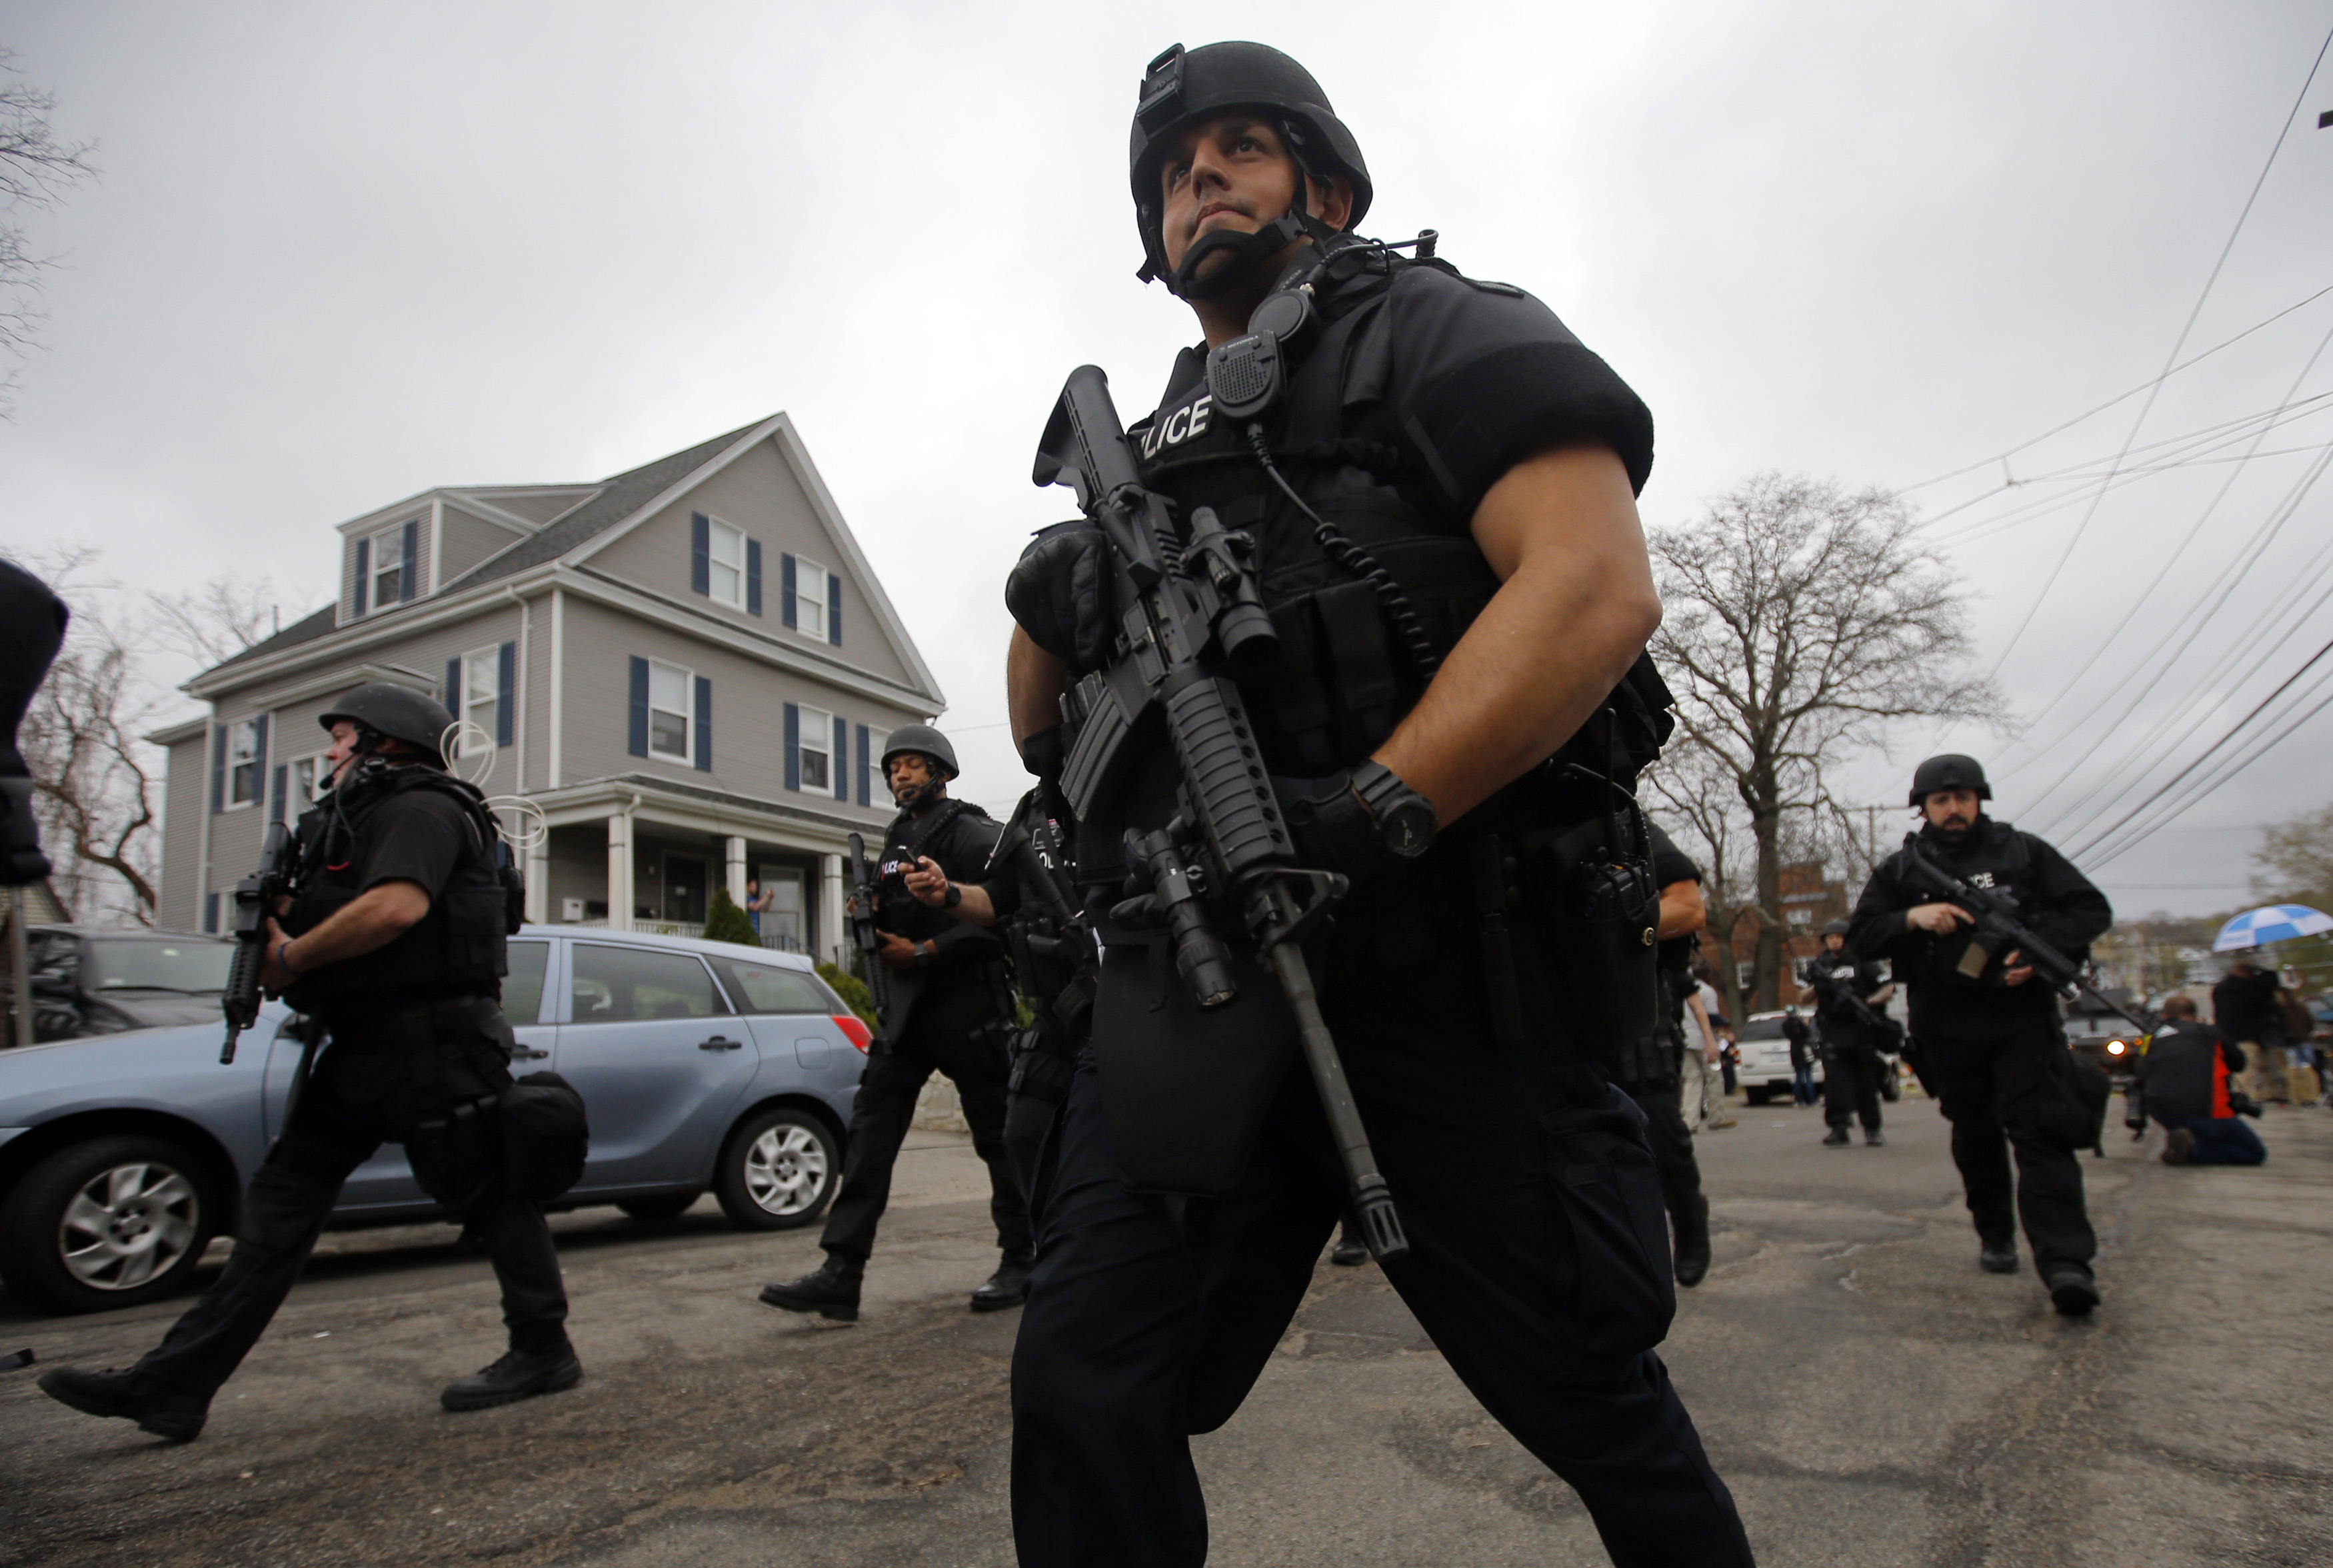 Police officers searched house to house for Dzhokhar Tsarnaev, the surviving suspect in the Boston Marathon bombings, in a neighborhood in Watertown, Mass., on April 19, 2013.